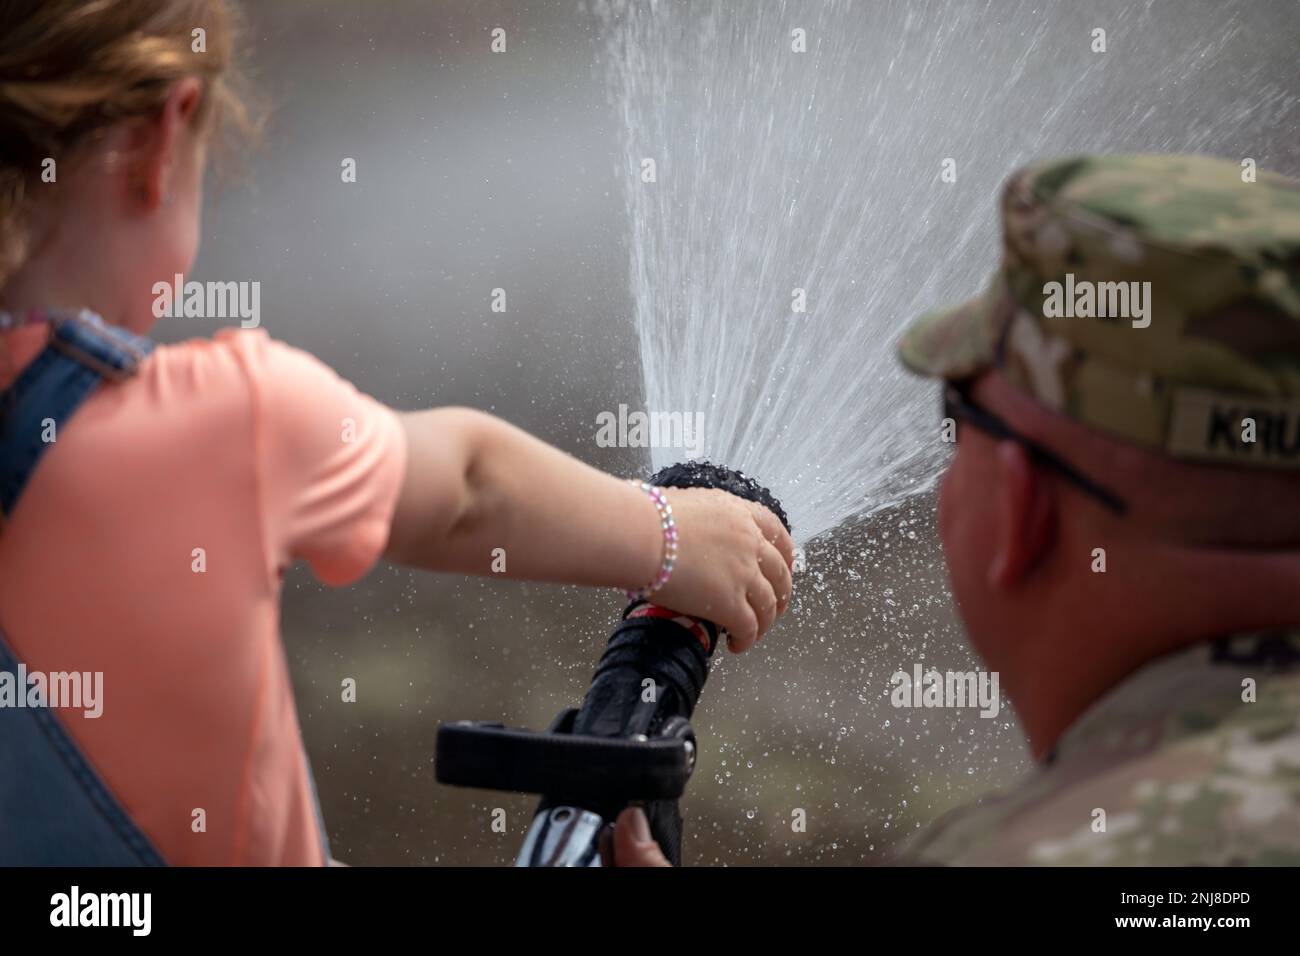 Six-year-old Birdie Amerson sprays a fire hose with the help of Sgt. Steve Krueger, 467th Engineer Battalion, Firefighter Headquarters, during an open house at Fort Des Moines, Iowa, Aug. 6, 2022. The event welcomed more than 70 people to the historic U.S Army Reserve base to see the current training units. Stock Photo